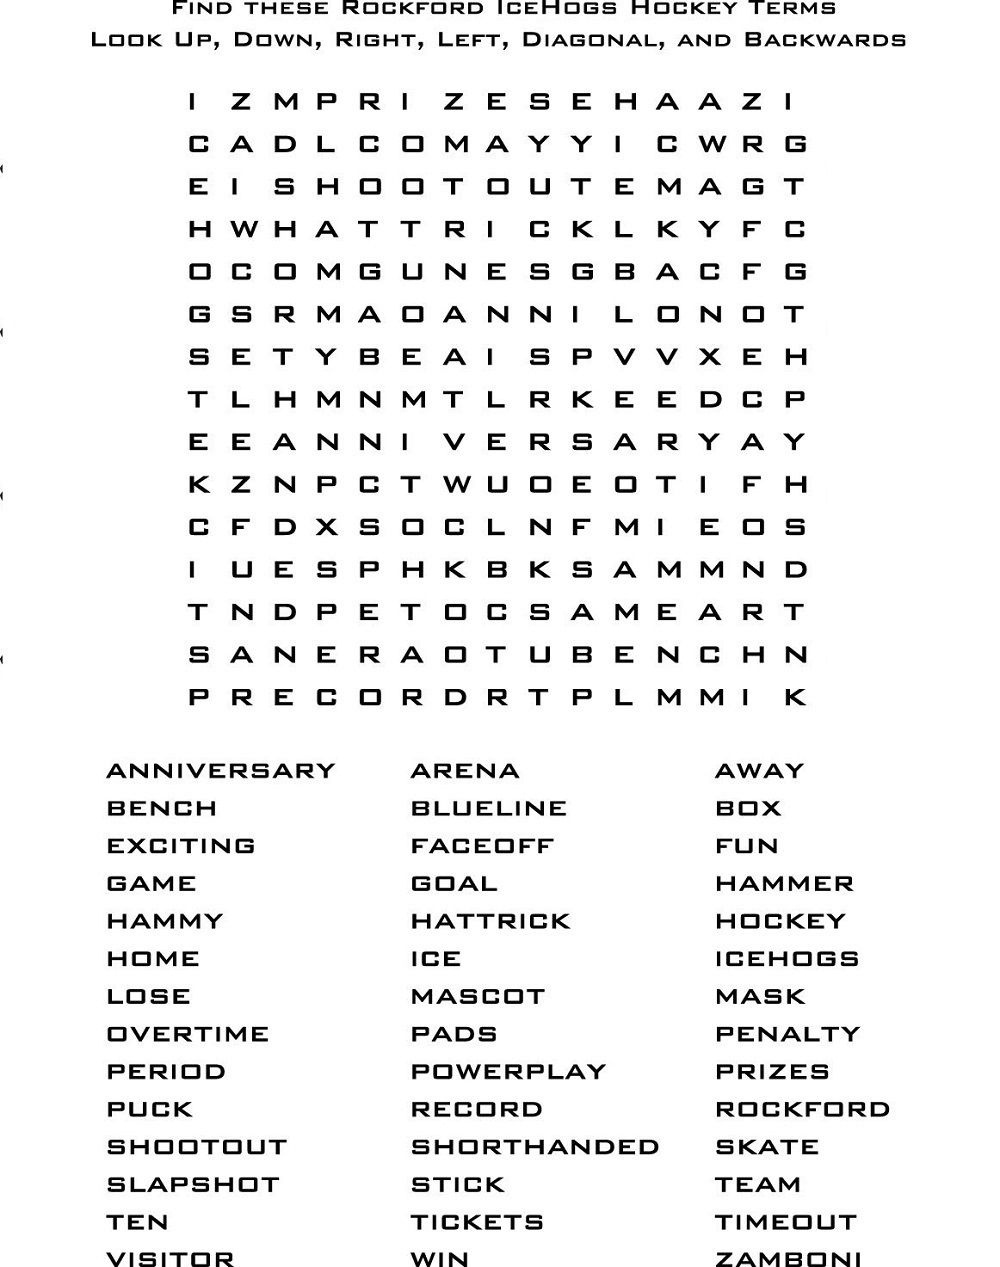 Free Printable Word Searches For Adults Large Print Free Printable